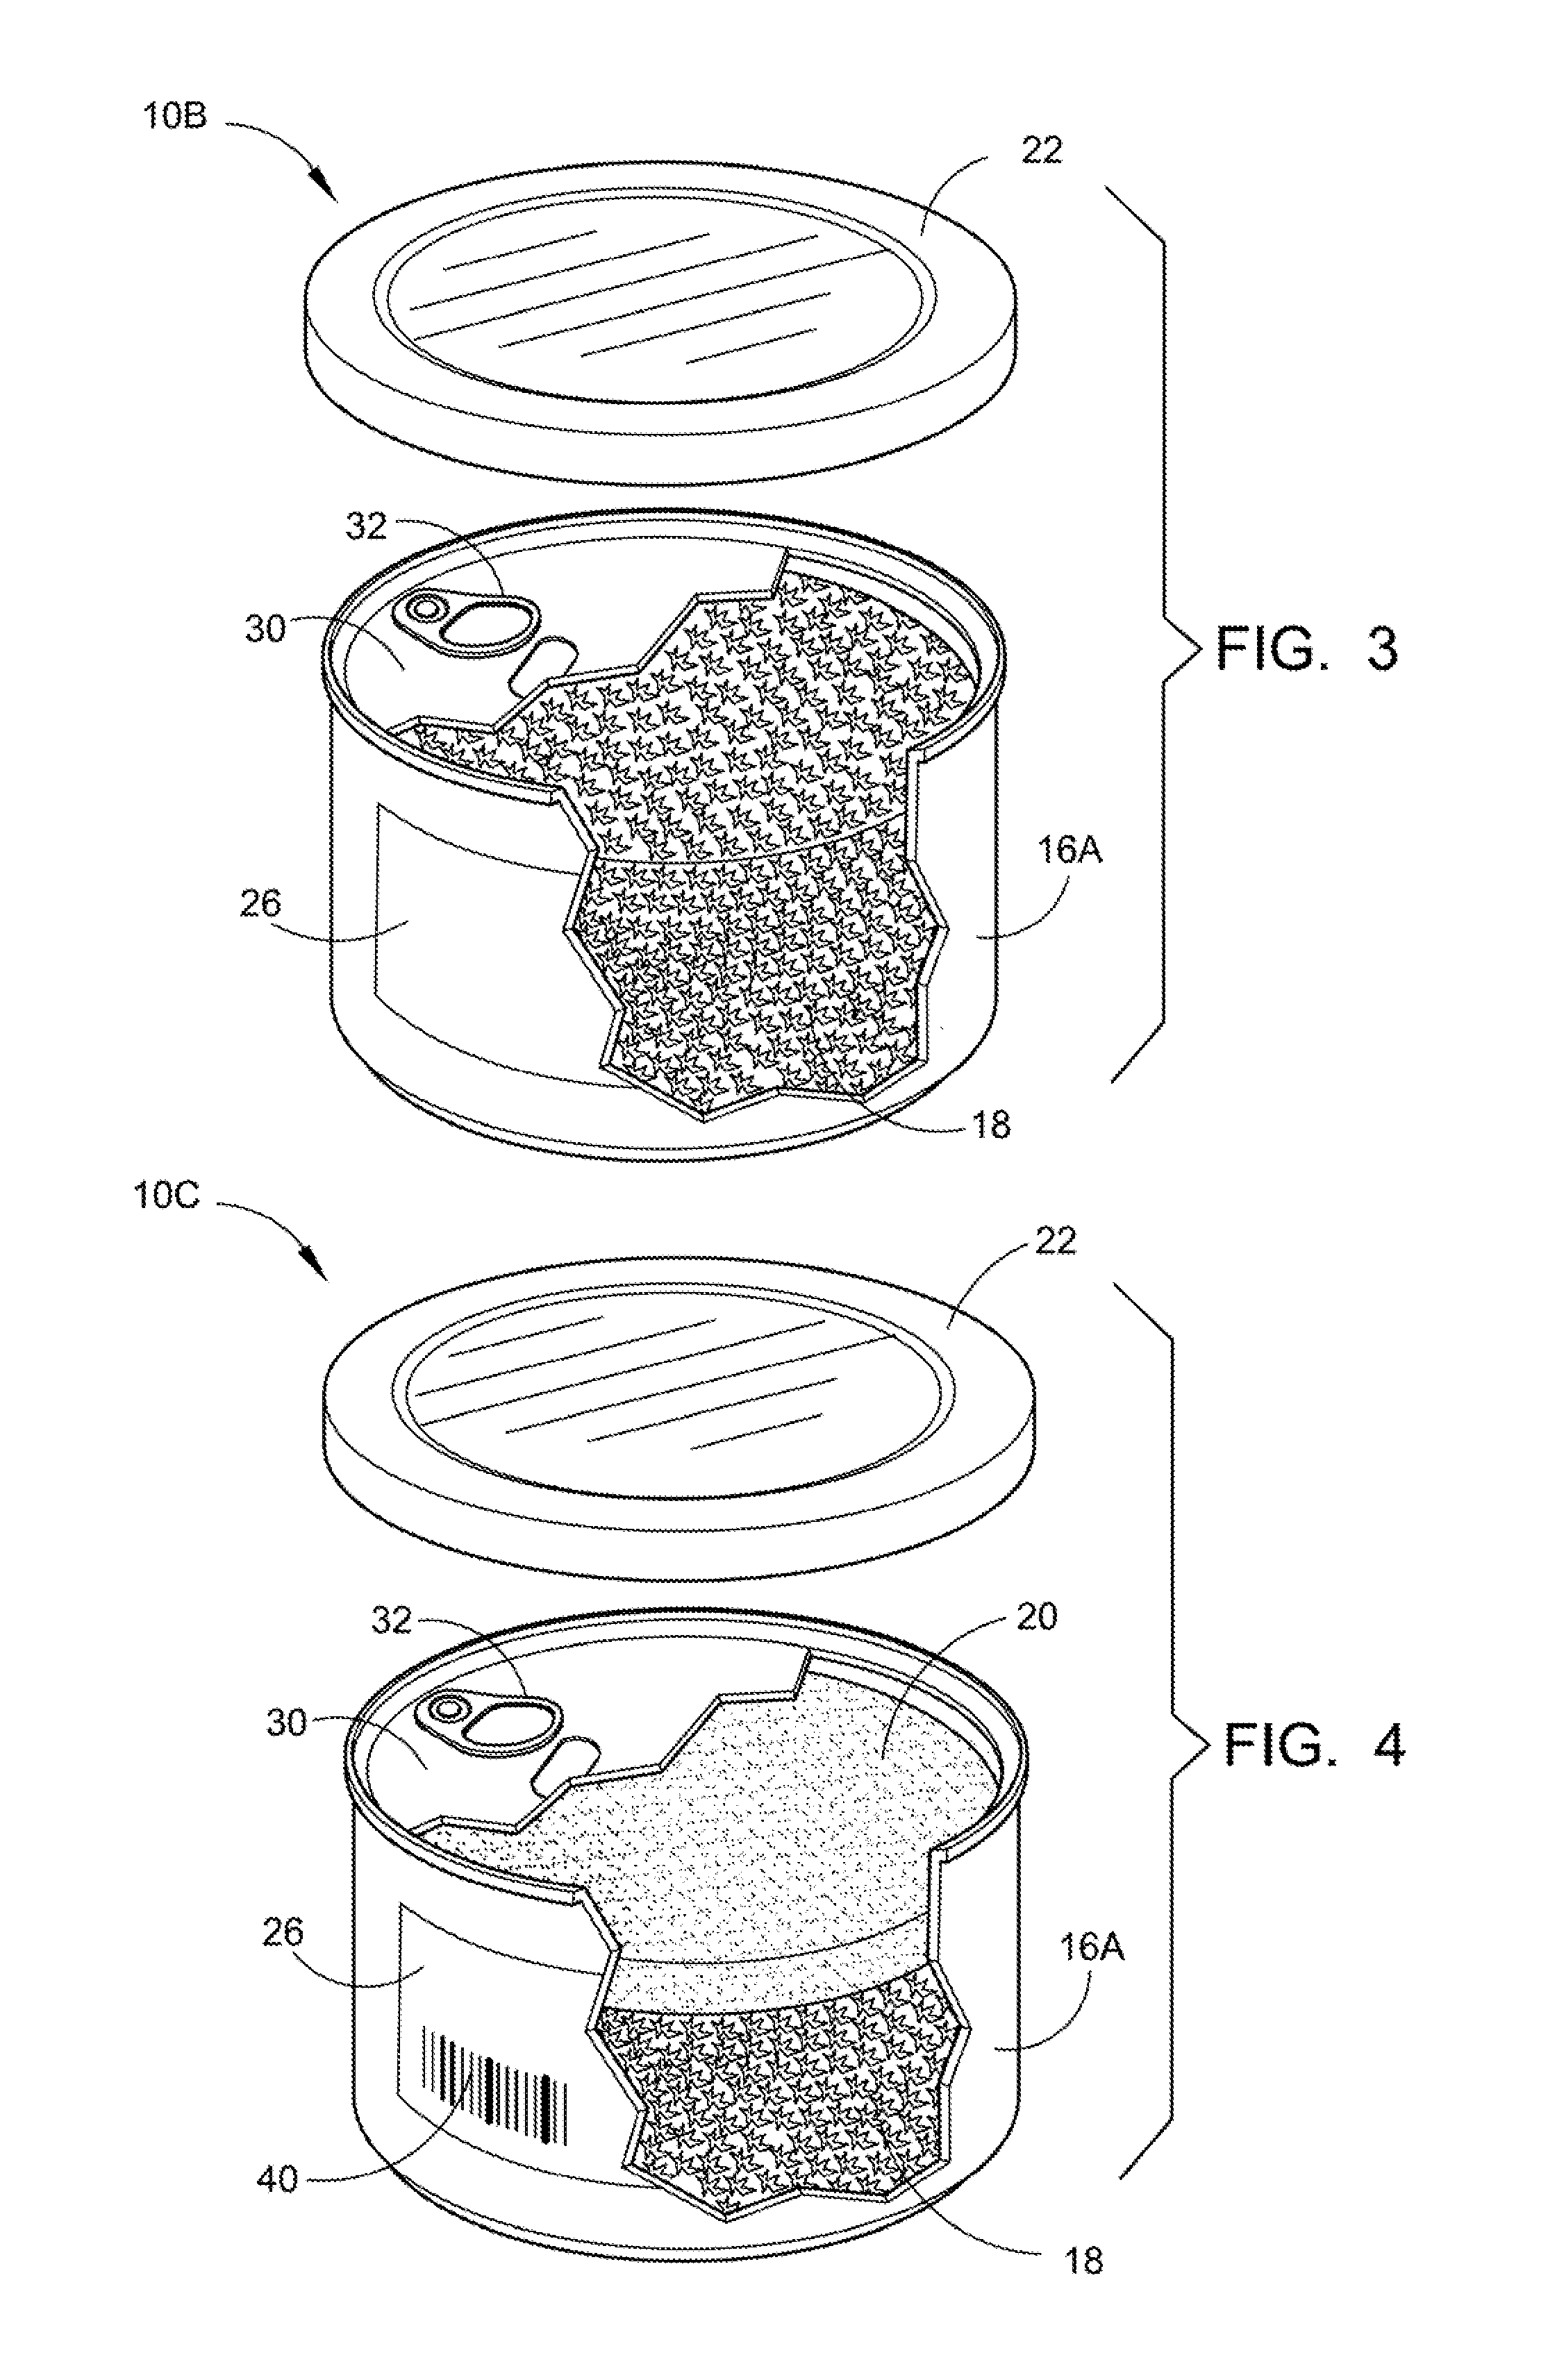 Storage preservation and transport for a controlled substance